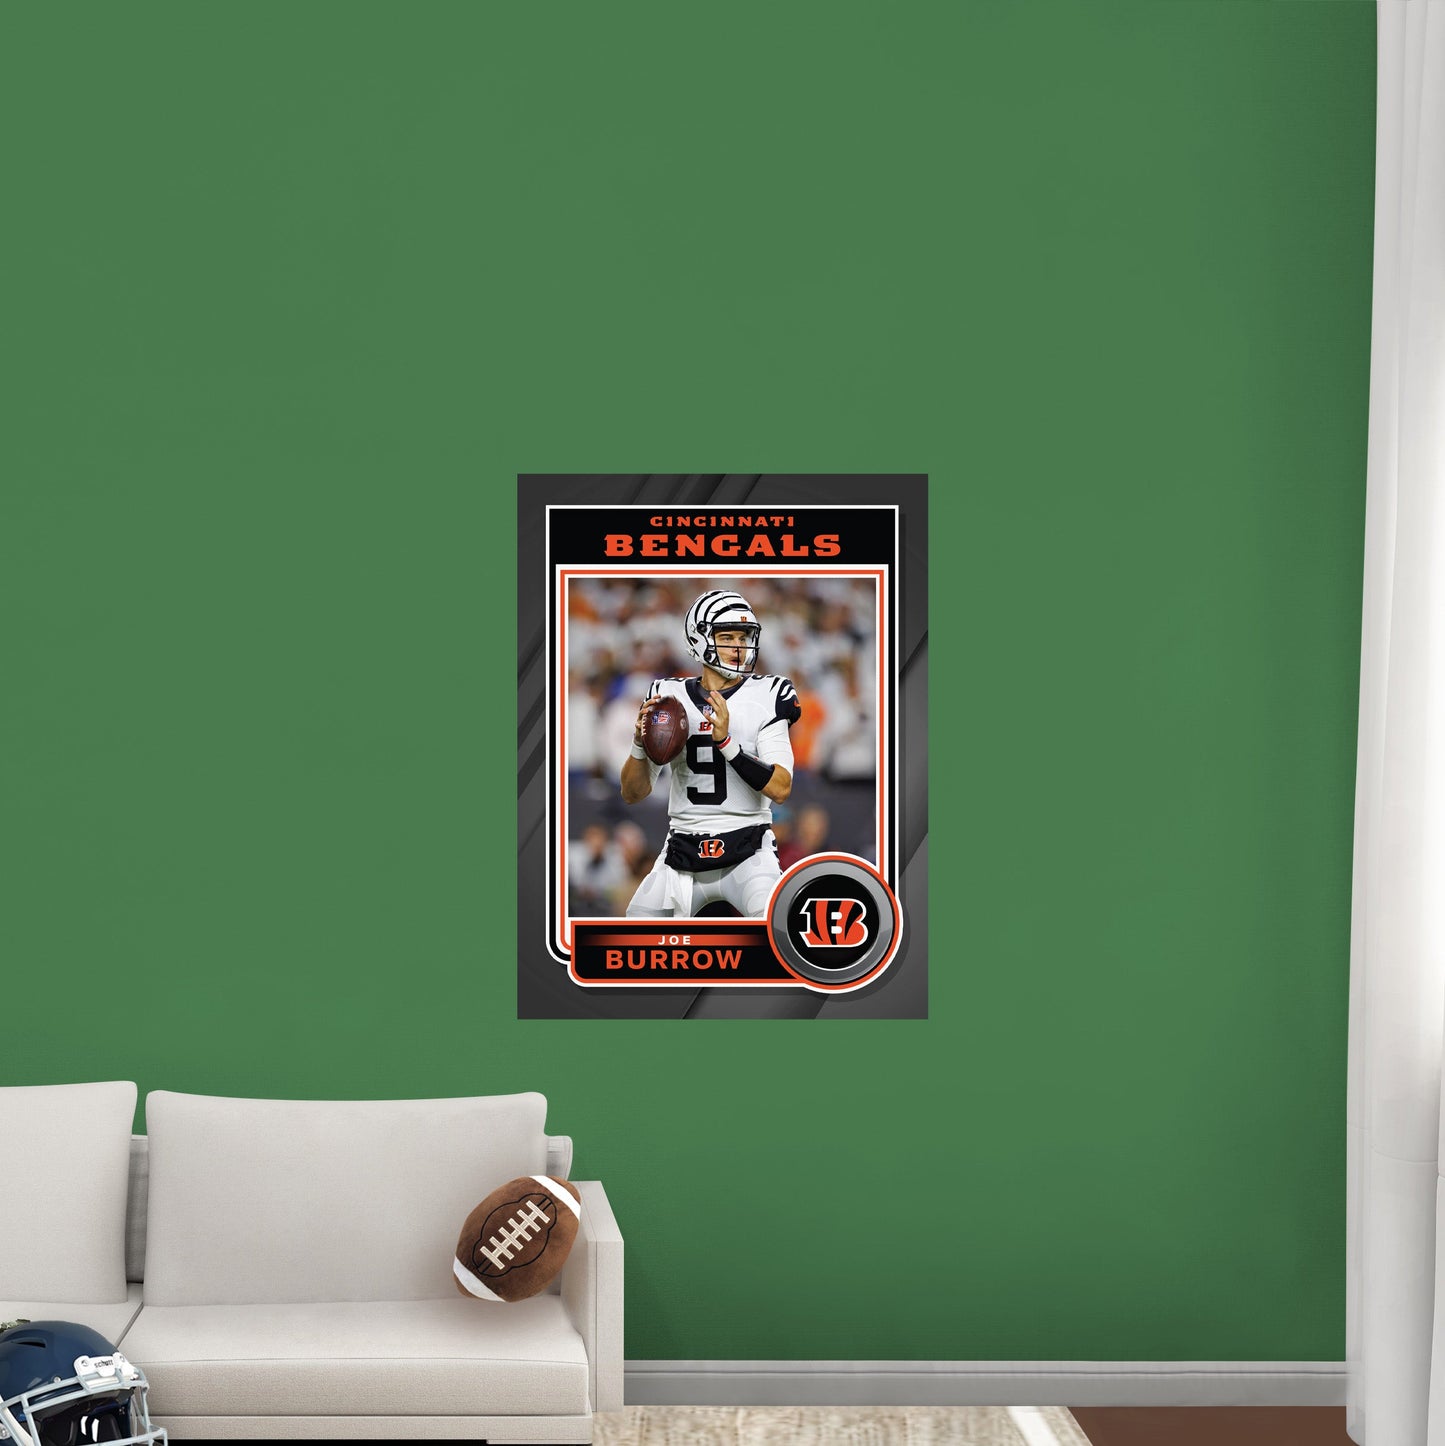 Cincinnati Bengals: Joe Burrow Poster - Officially Licensed NFL Removable Adhesive Decal